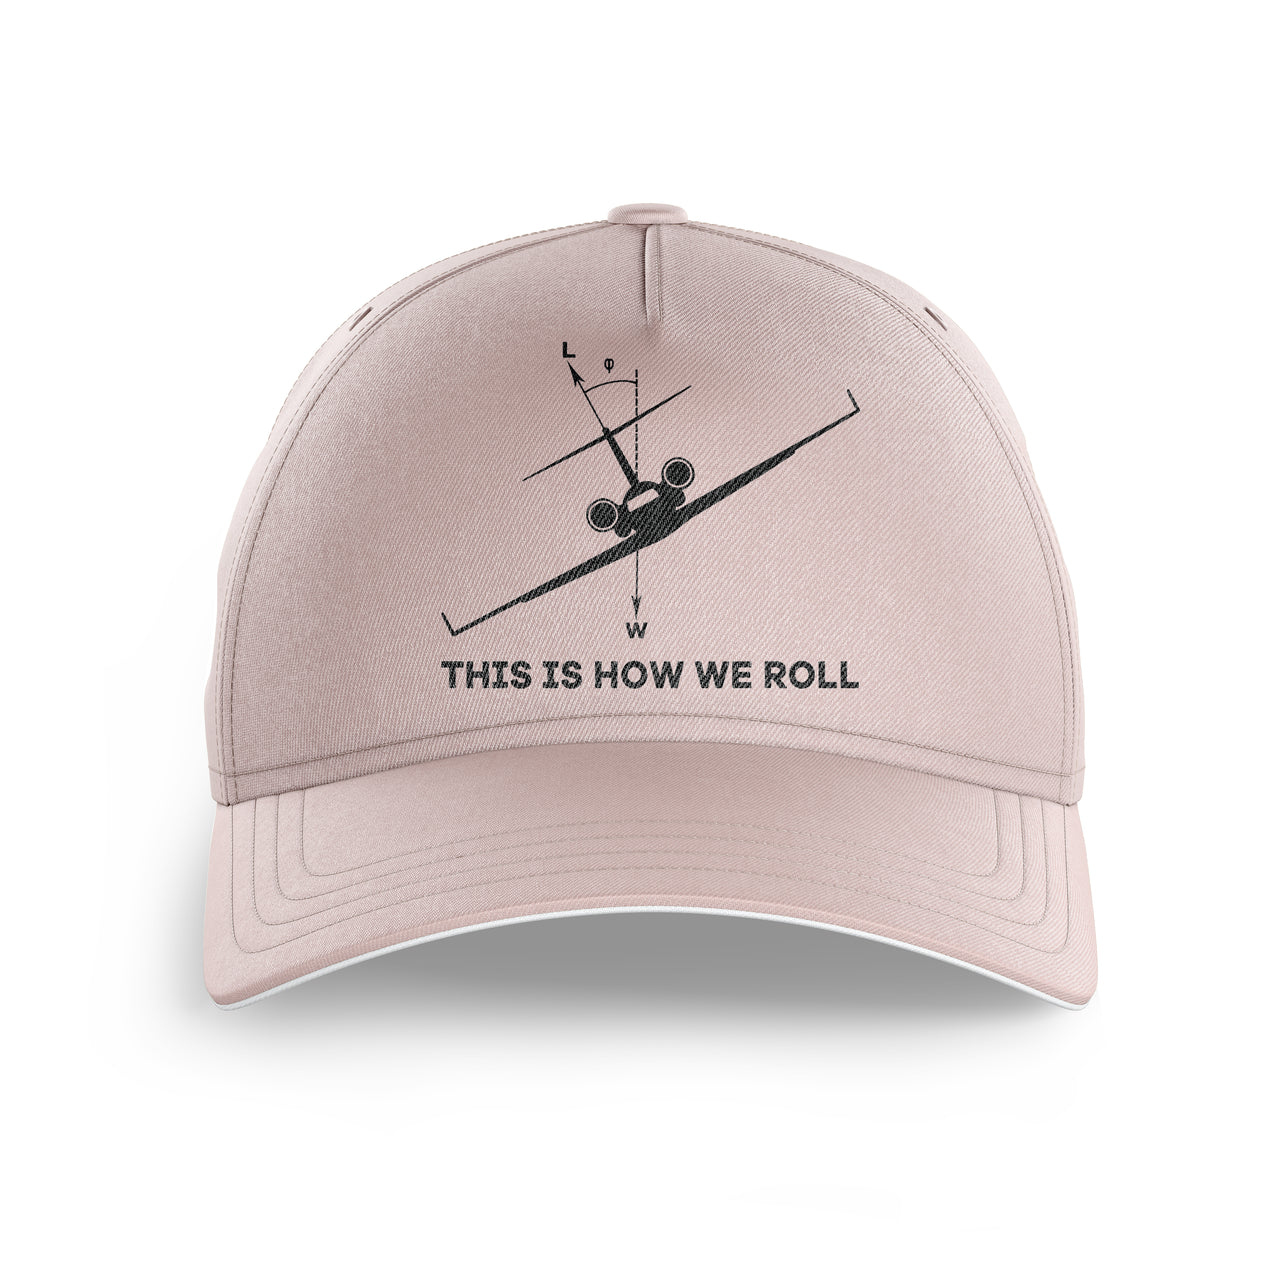 This is How We Roll Printed Hats